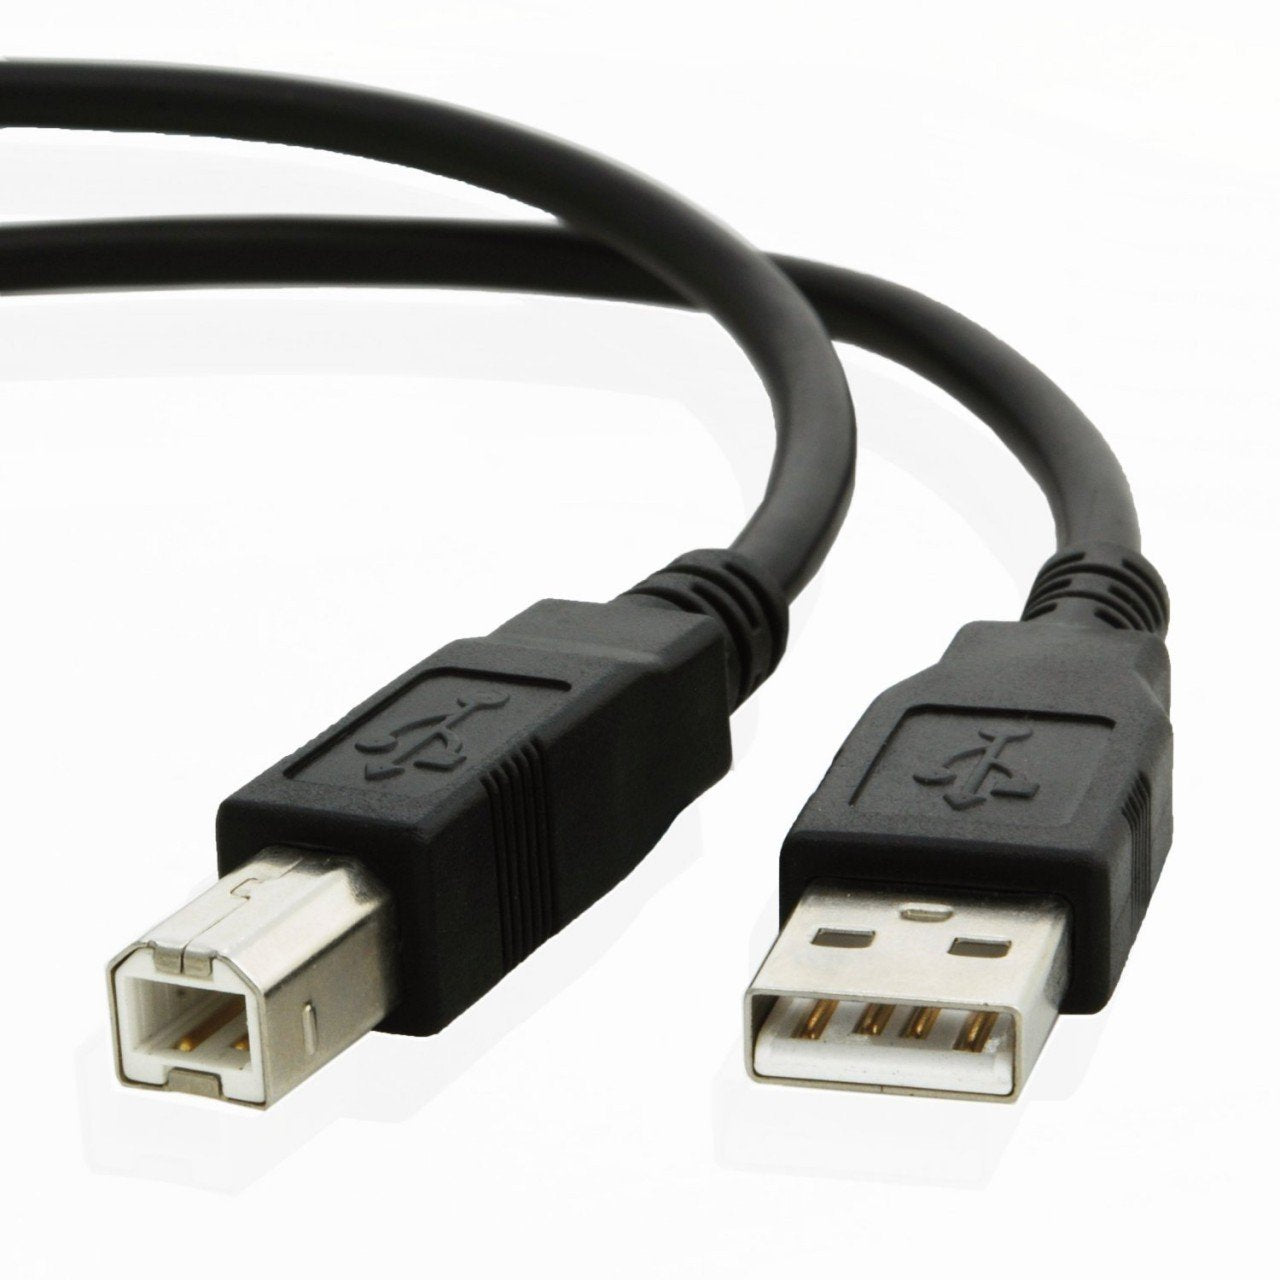 USB cable for Canon PIXMA MG6250